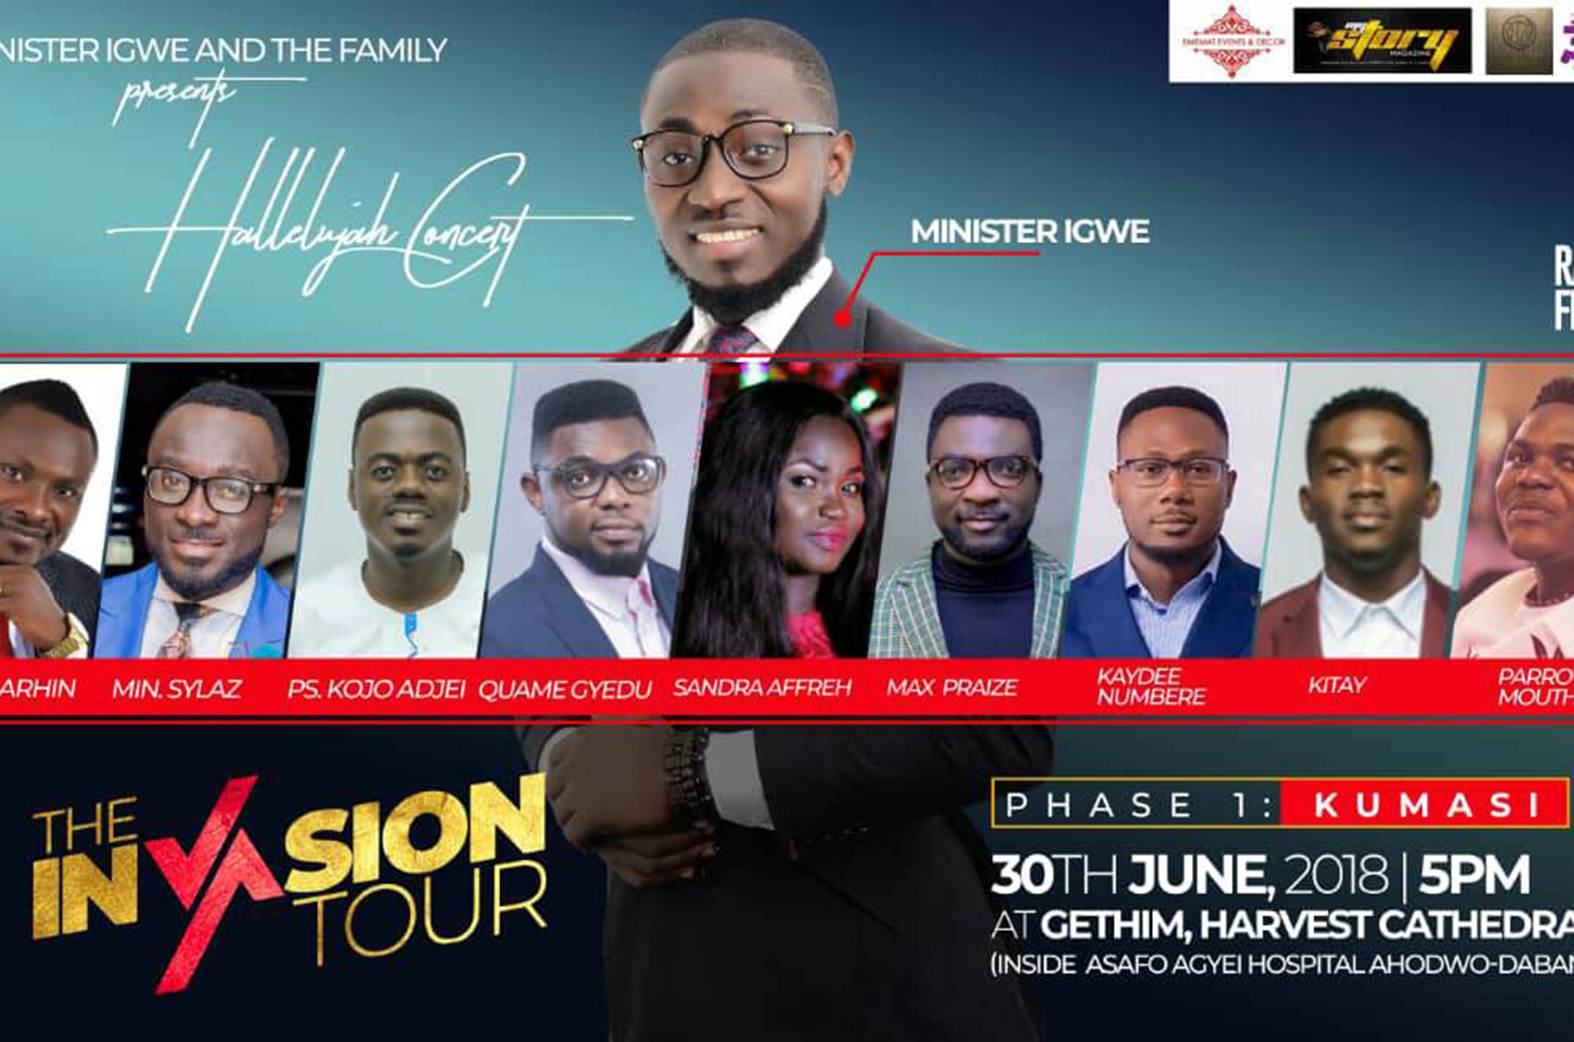 The Hallelujah Concert with Minister Igwe